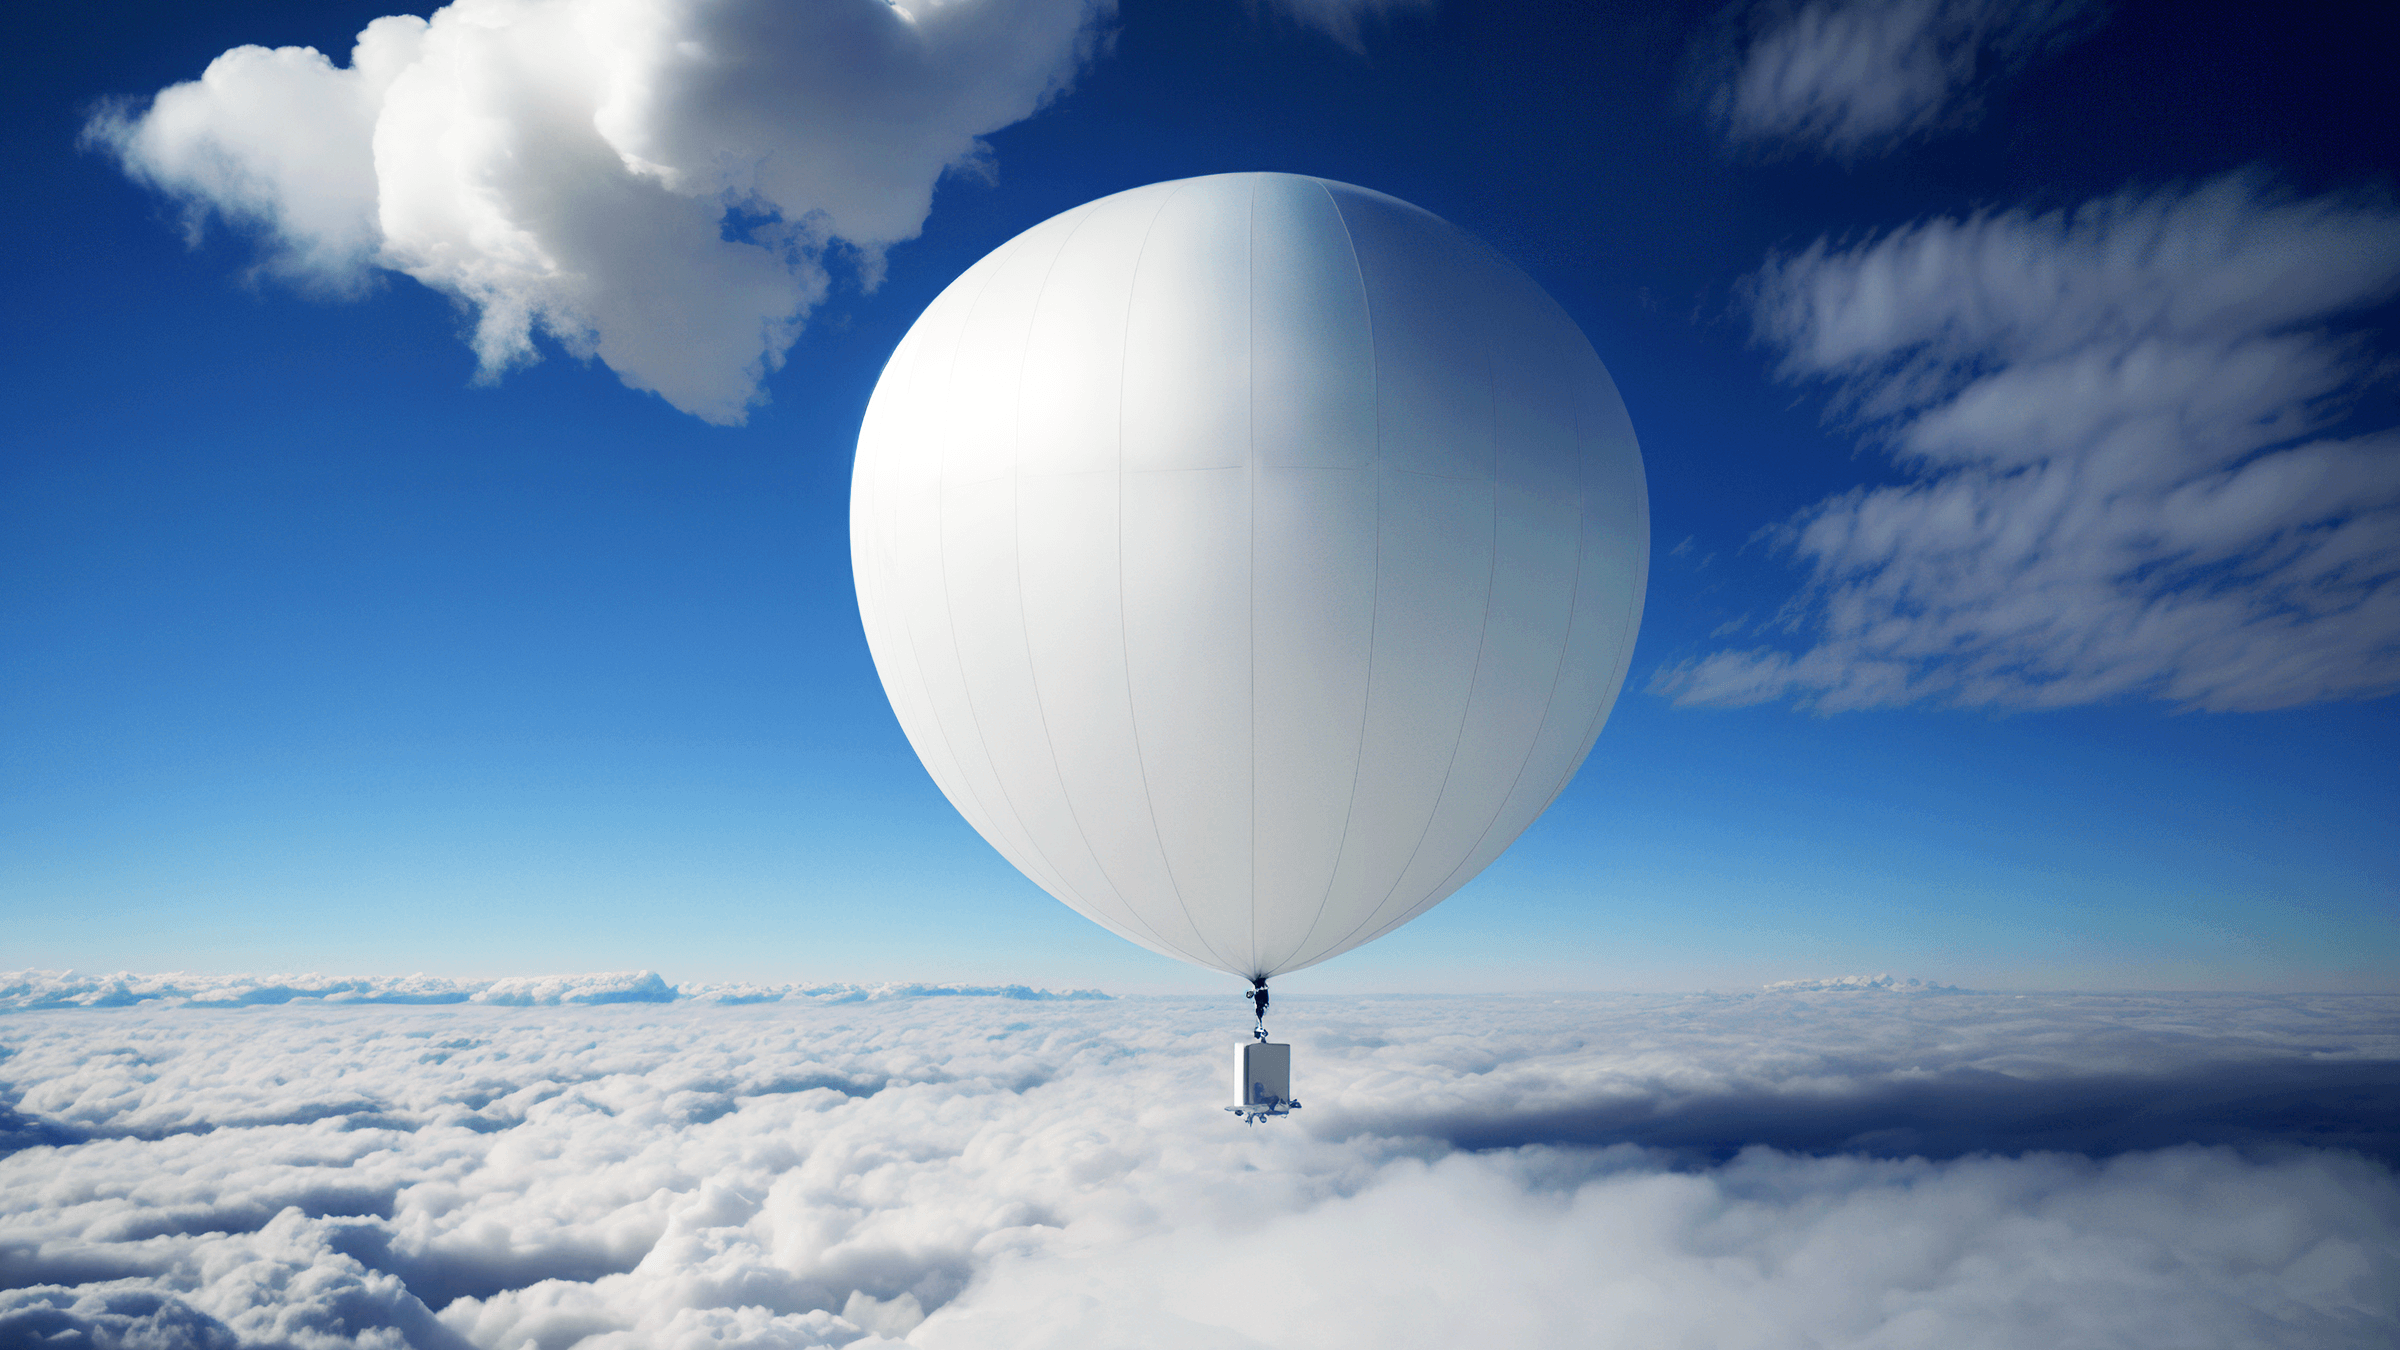 A spy balloon floats in the bright blue sky